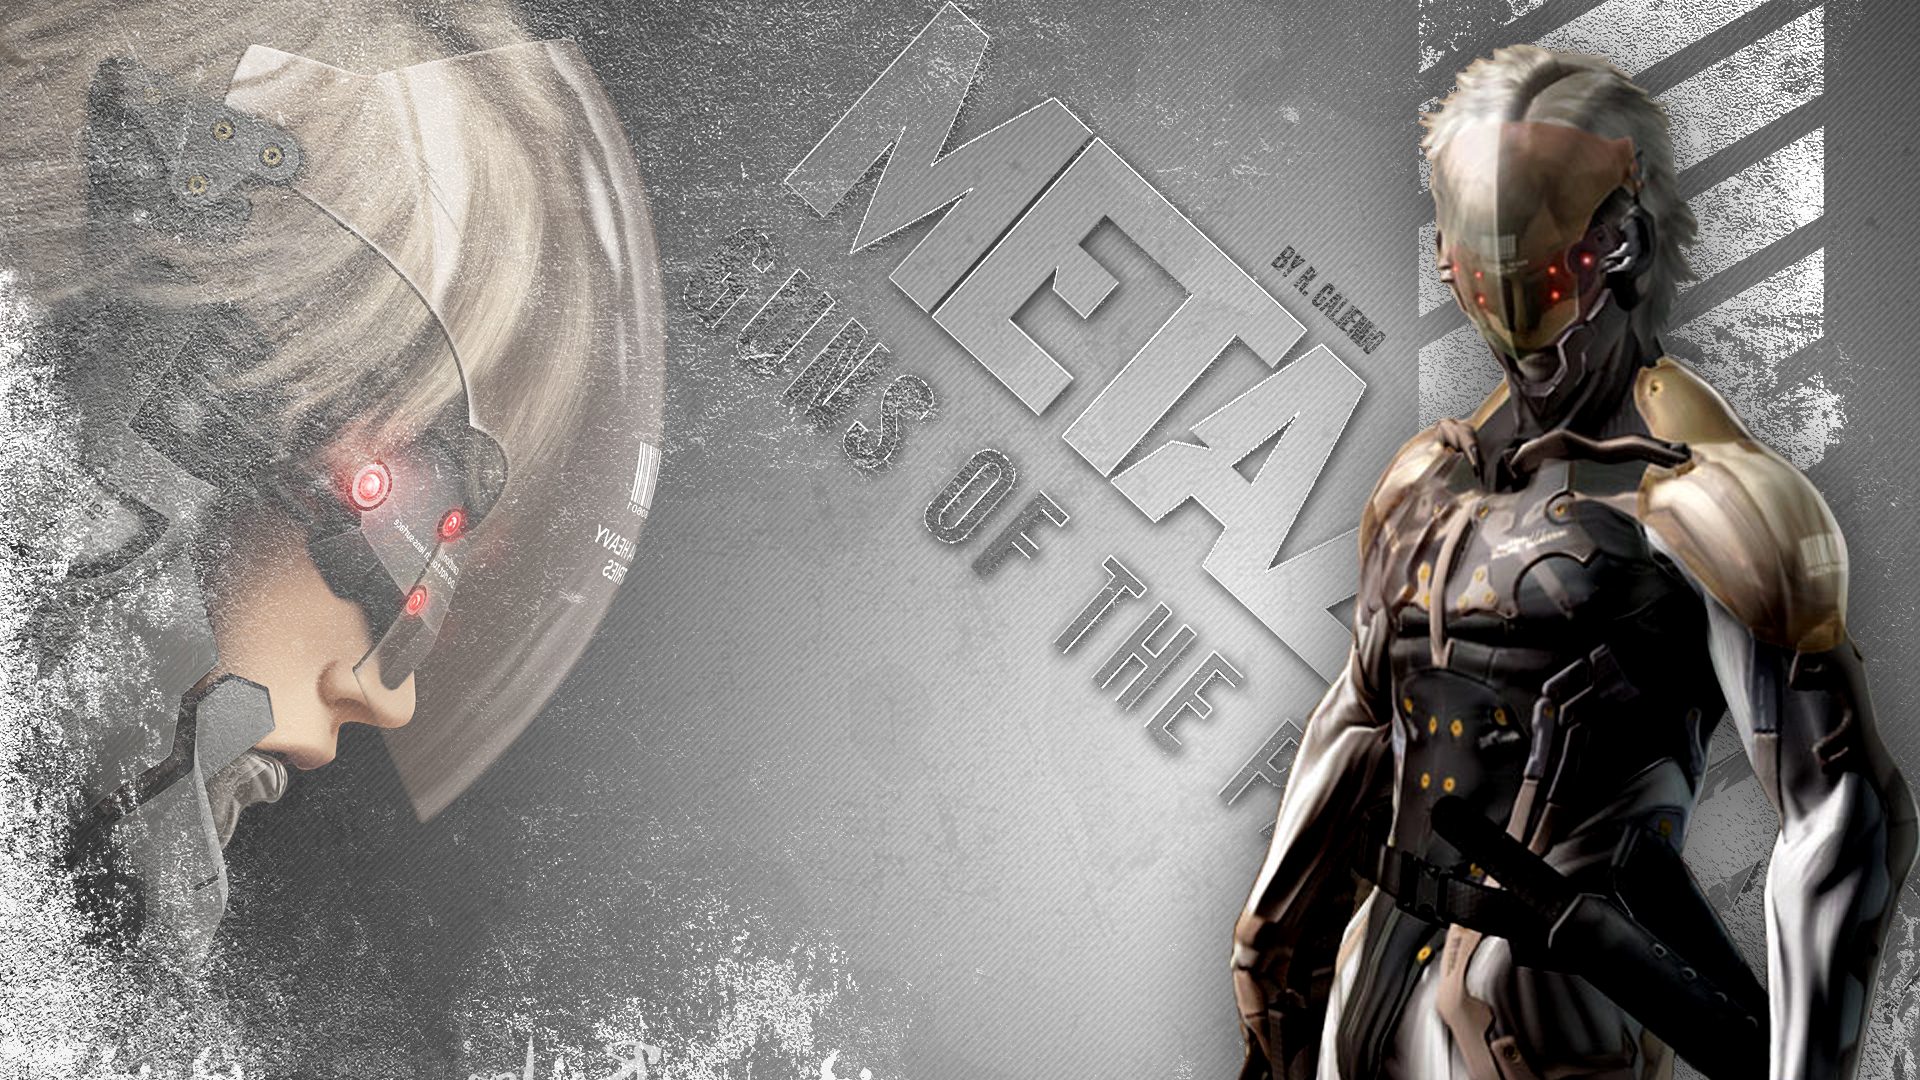 Metal Gear Solid Raiden by DonCaliendo on